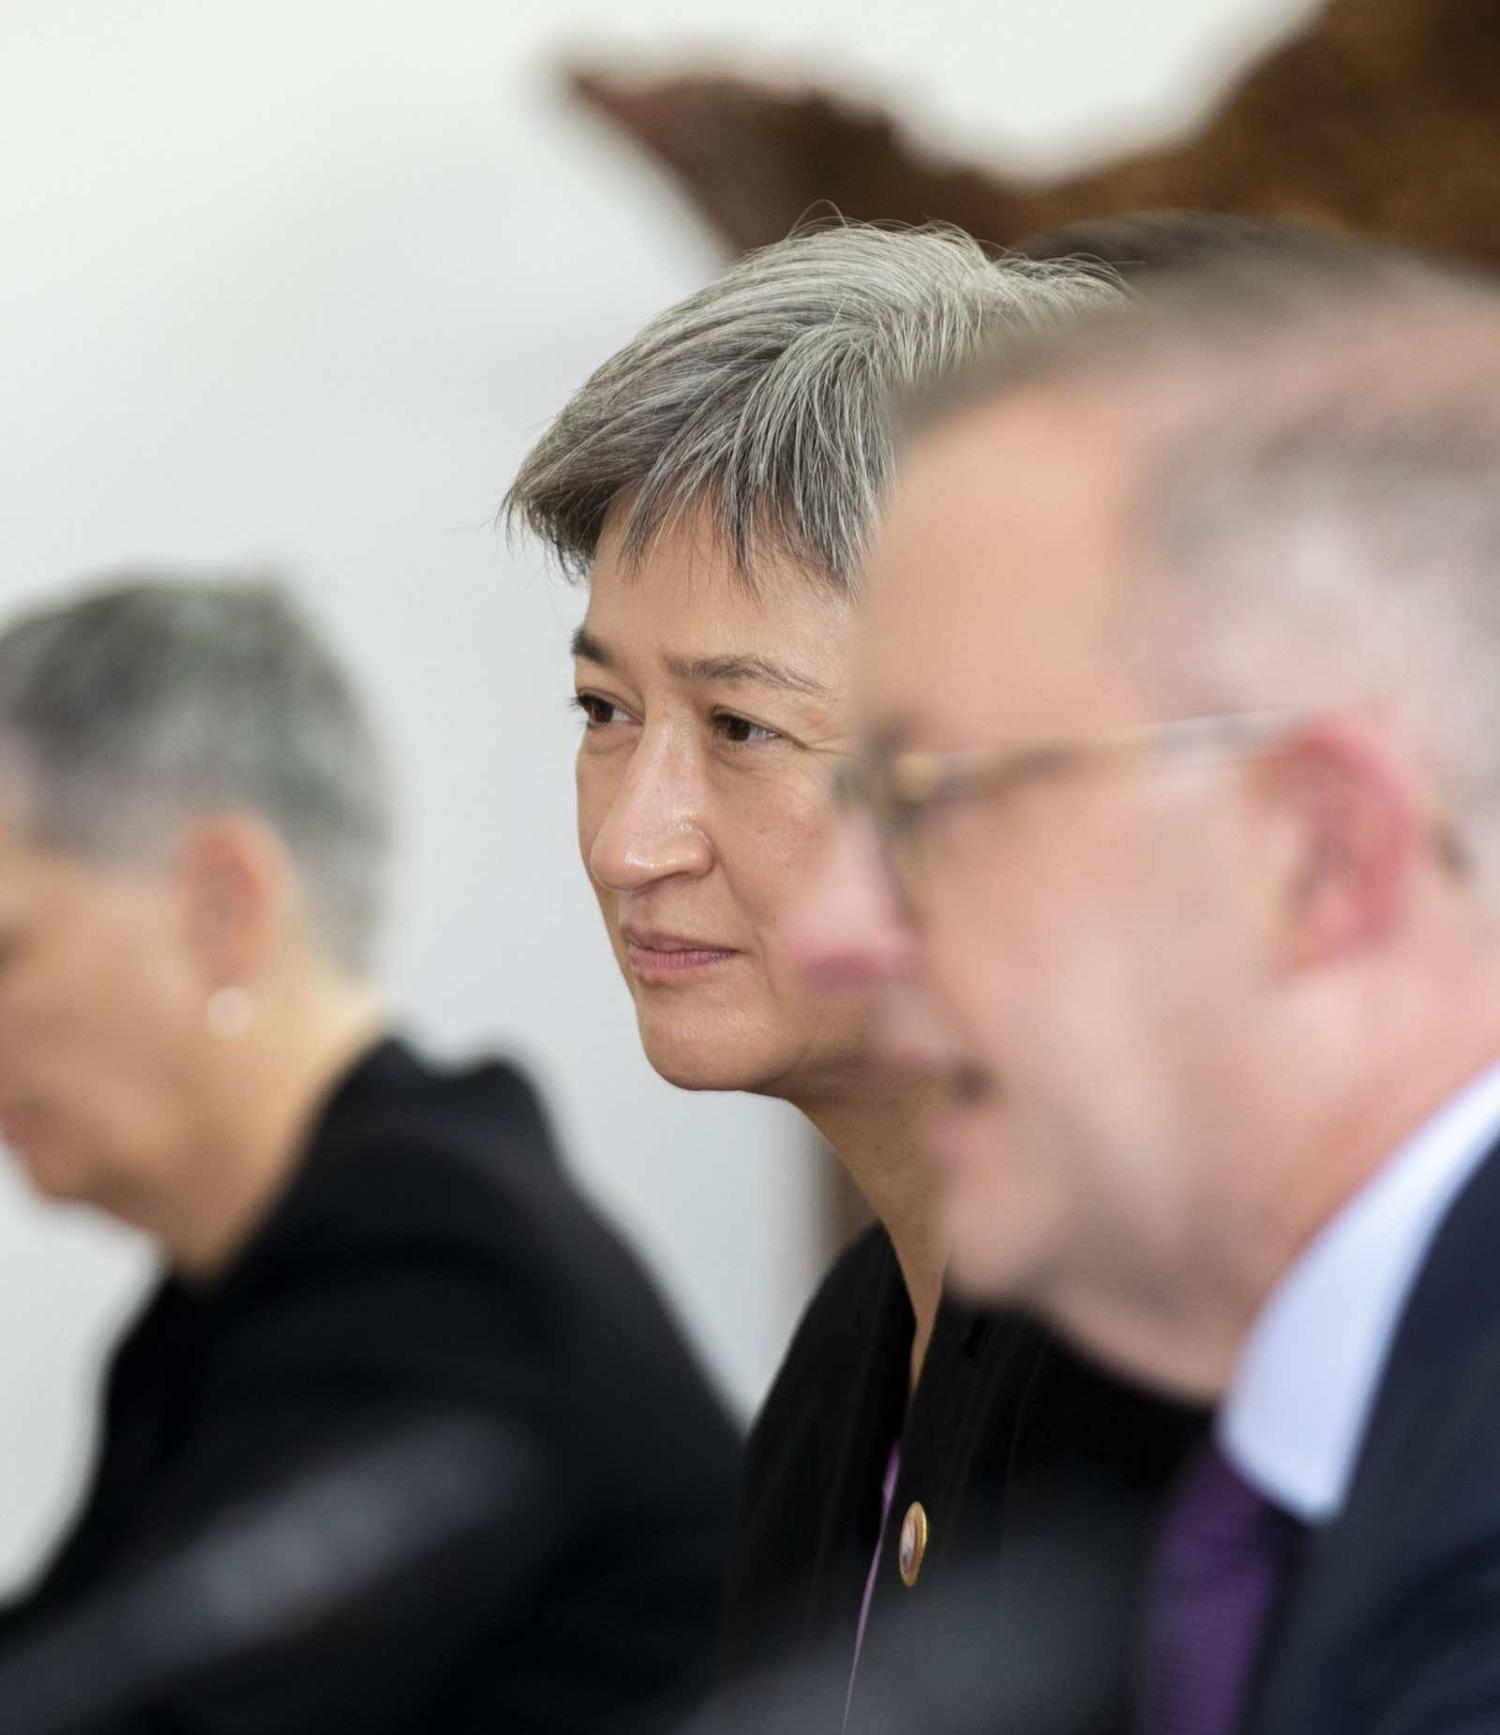 Foreign Minister Penny Wong with Prime Minister Anthony Albanese during a leaders meeting with Indonesian counterparts Joko Widodo and Retno Marsudi (@SenatorWong/Twitter)